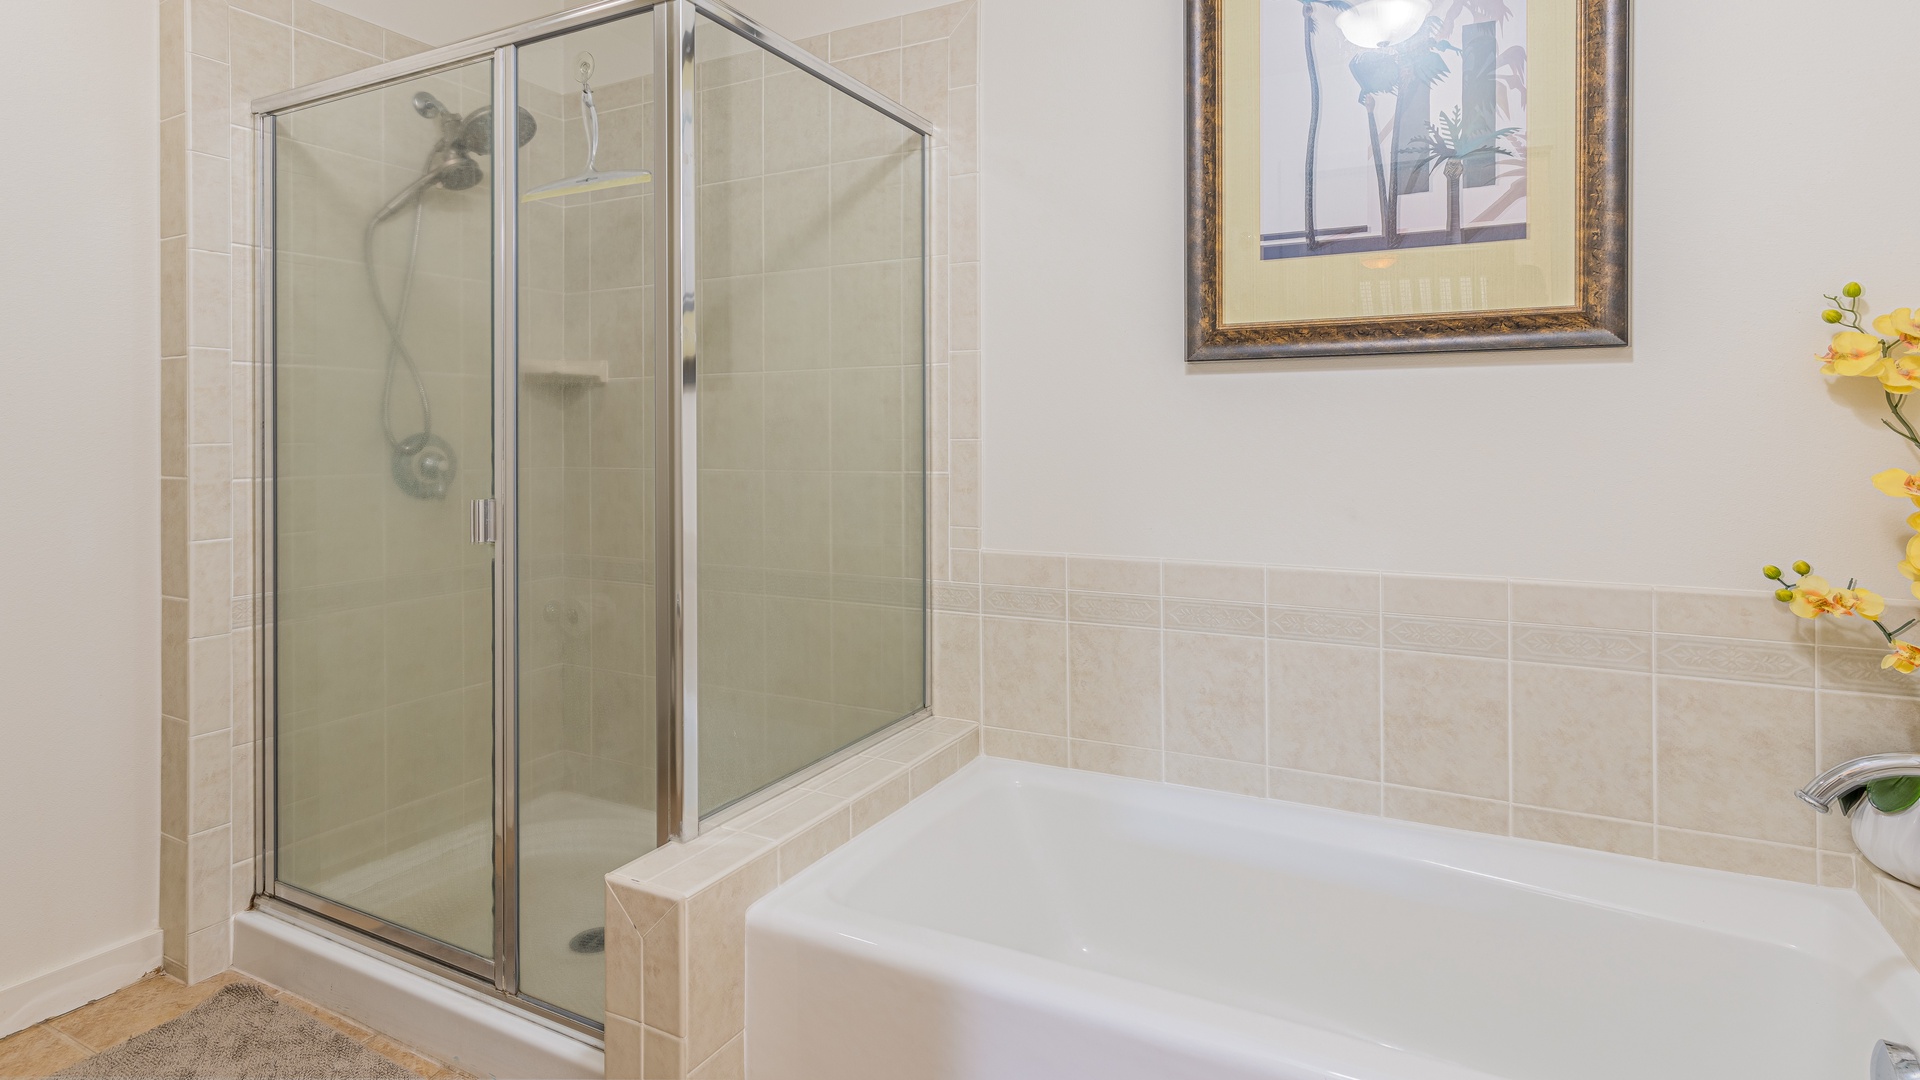 Kapolei Vacation Rentals, Kai Lani 8B - The primary guest bathroom with a shower and tub for soaking.